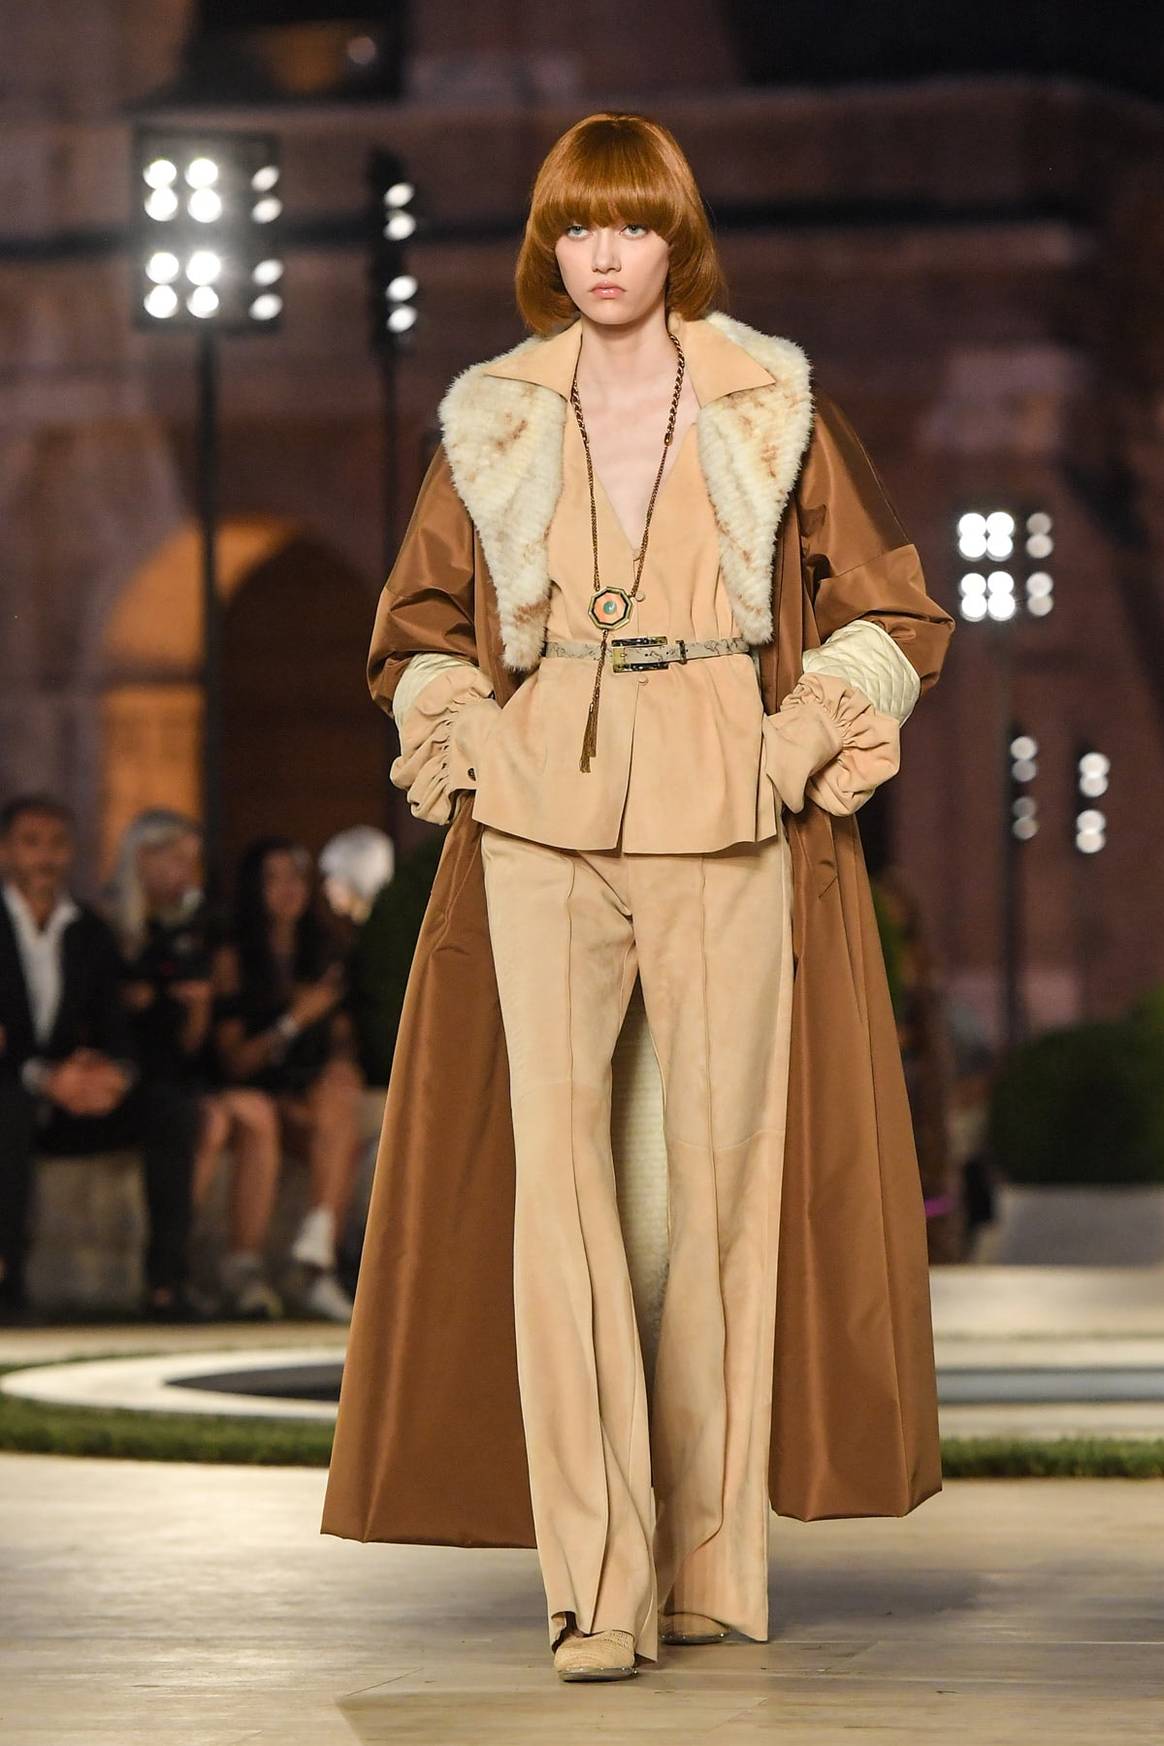 Fendi honours Karl's memory with couture show in restored Roman temple